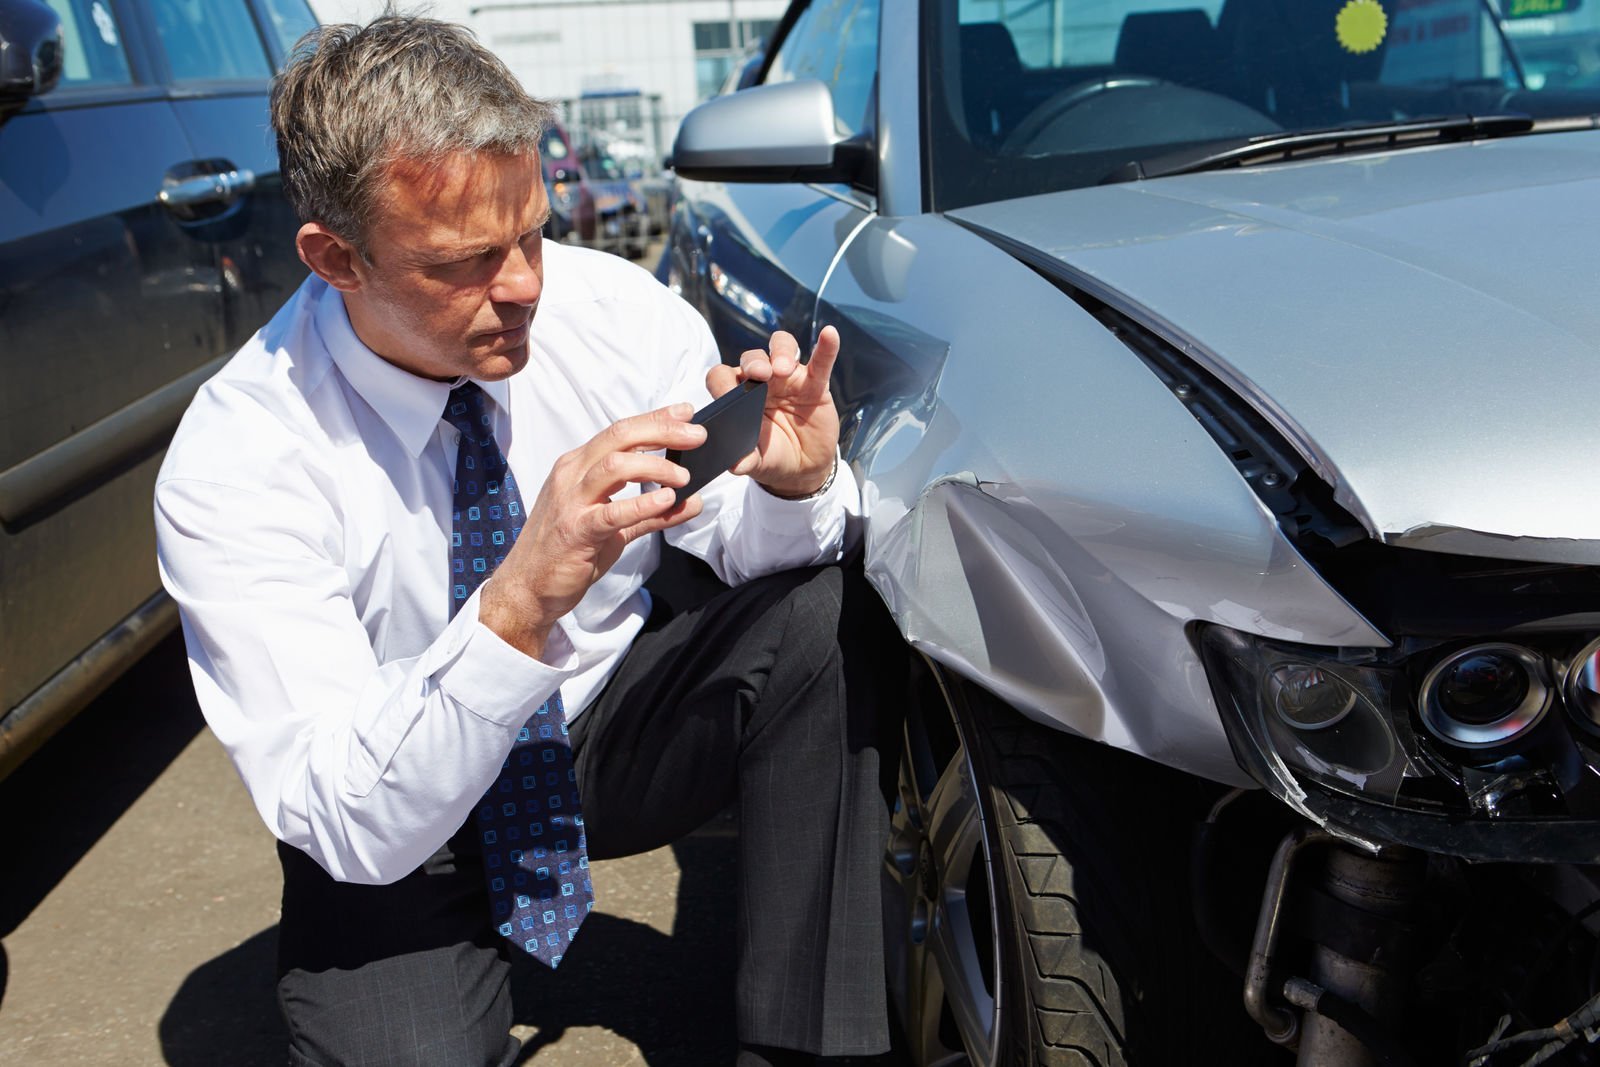 How do car insurance companies determine replacement value?